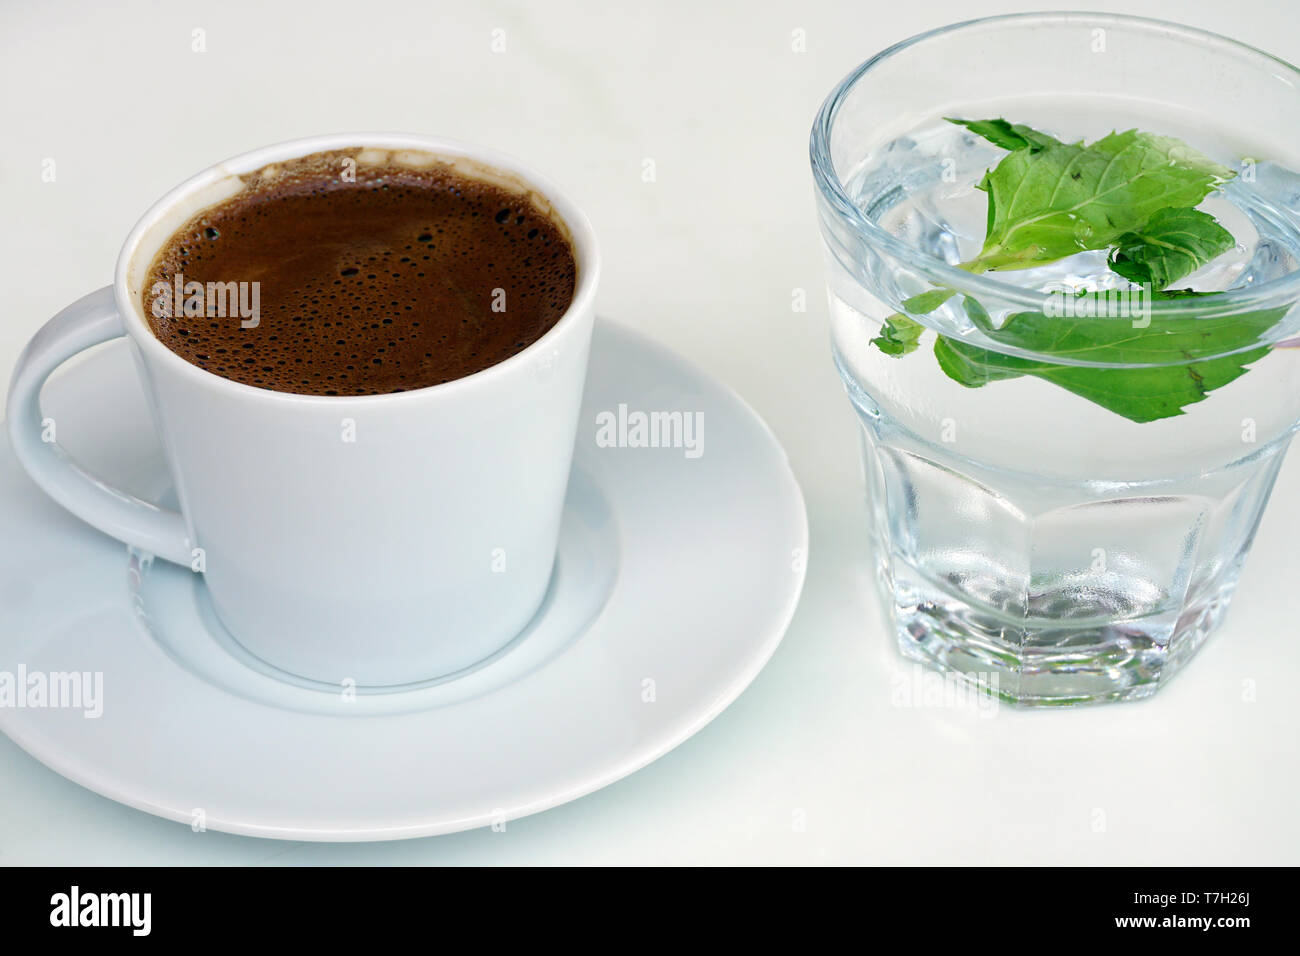 Turkish coffee and traditional fortunetelling Stock Photo